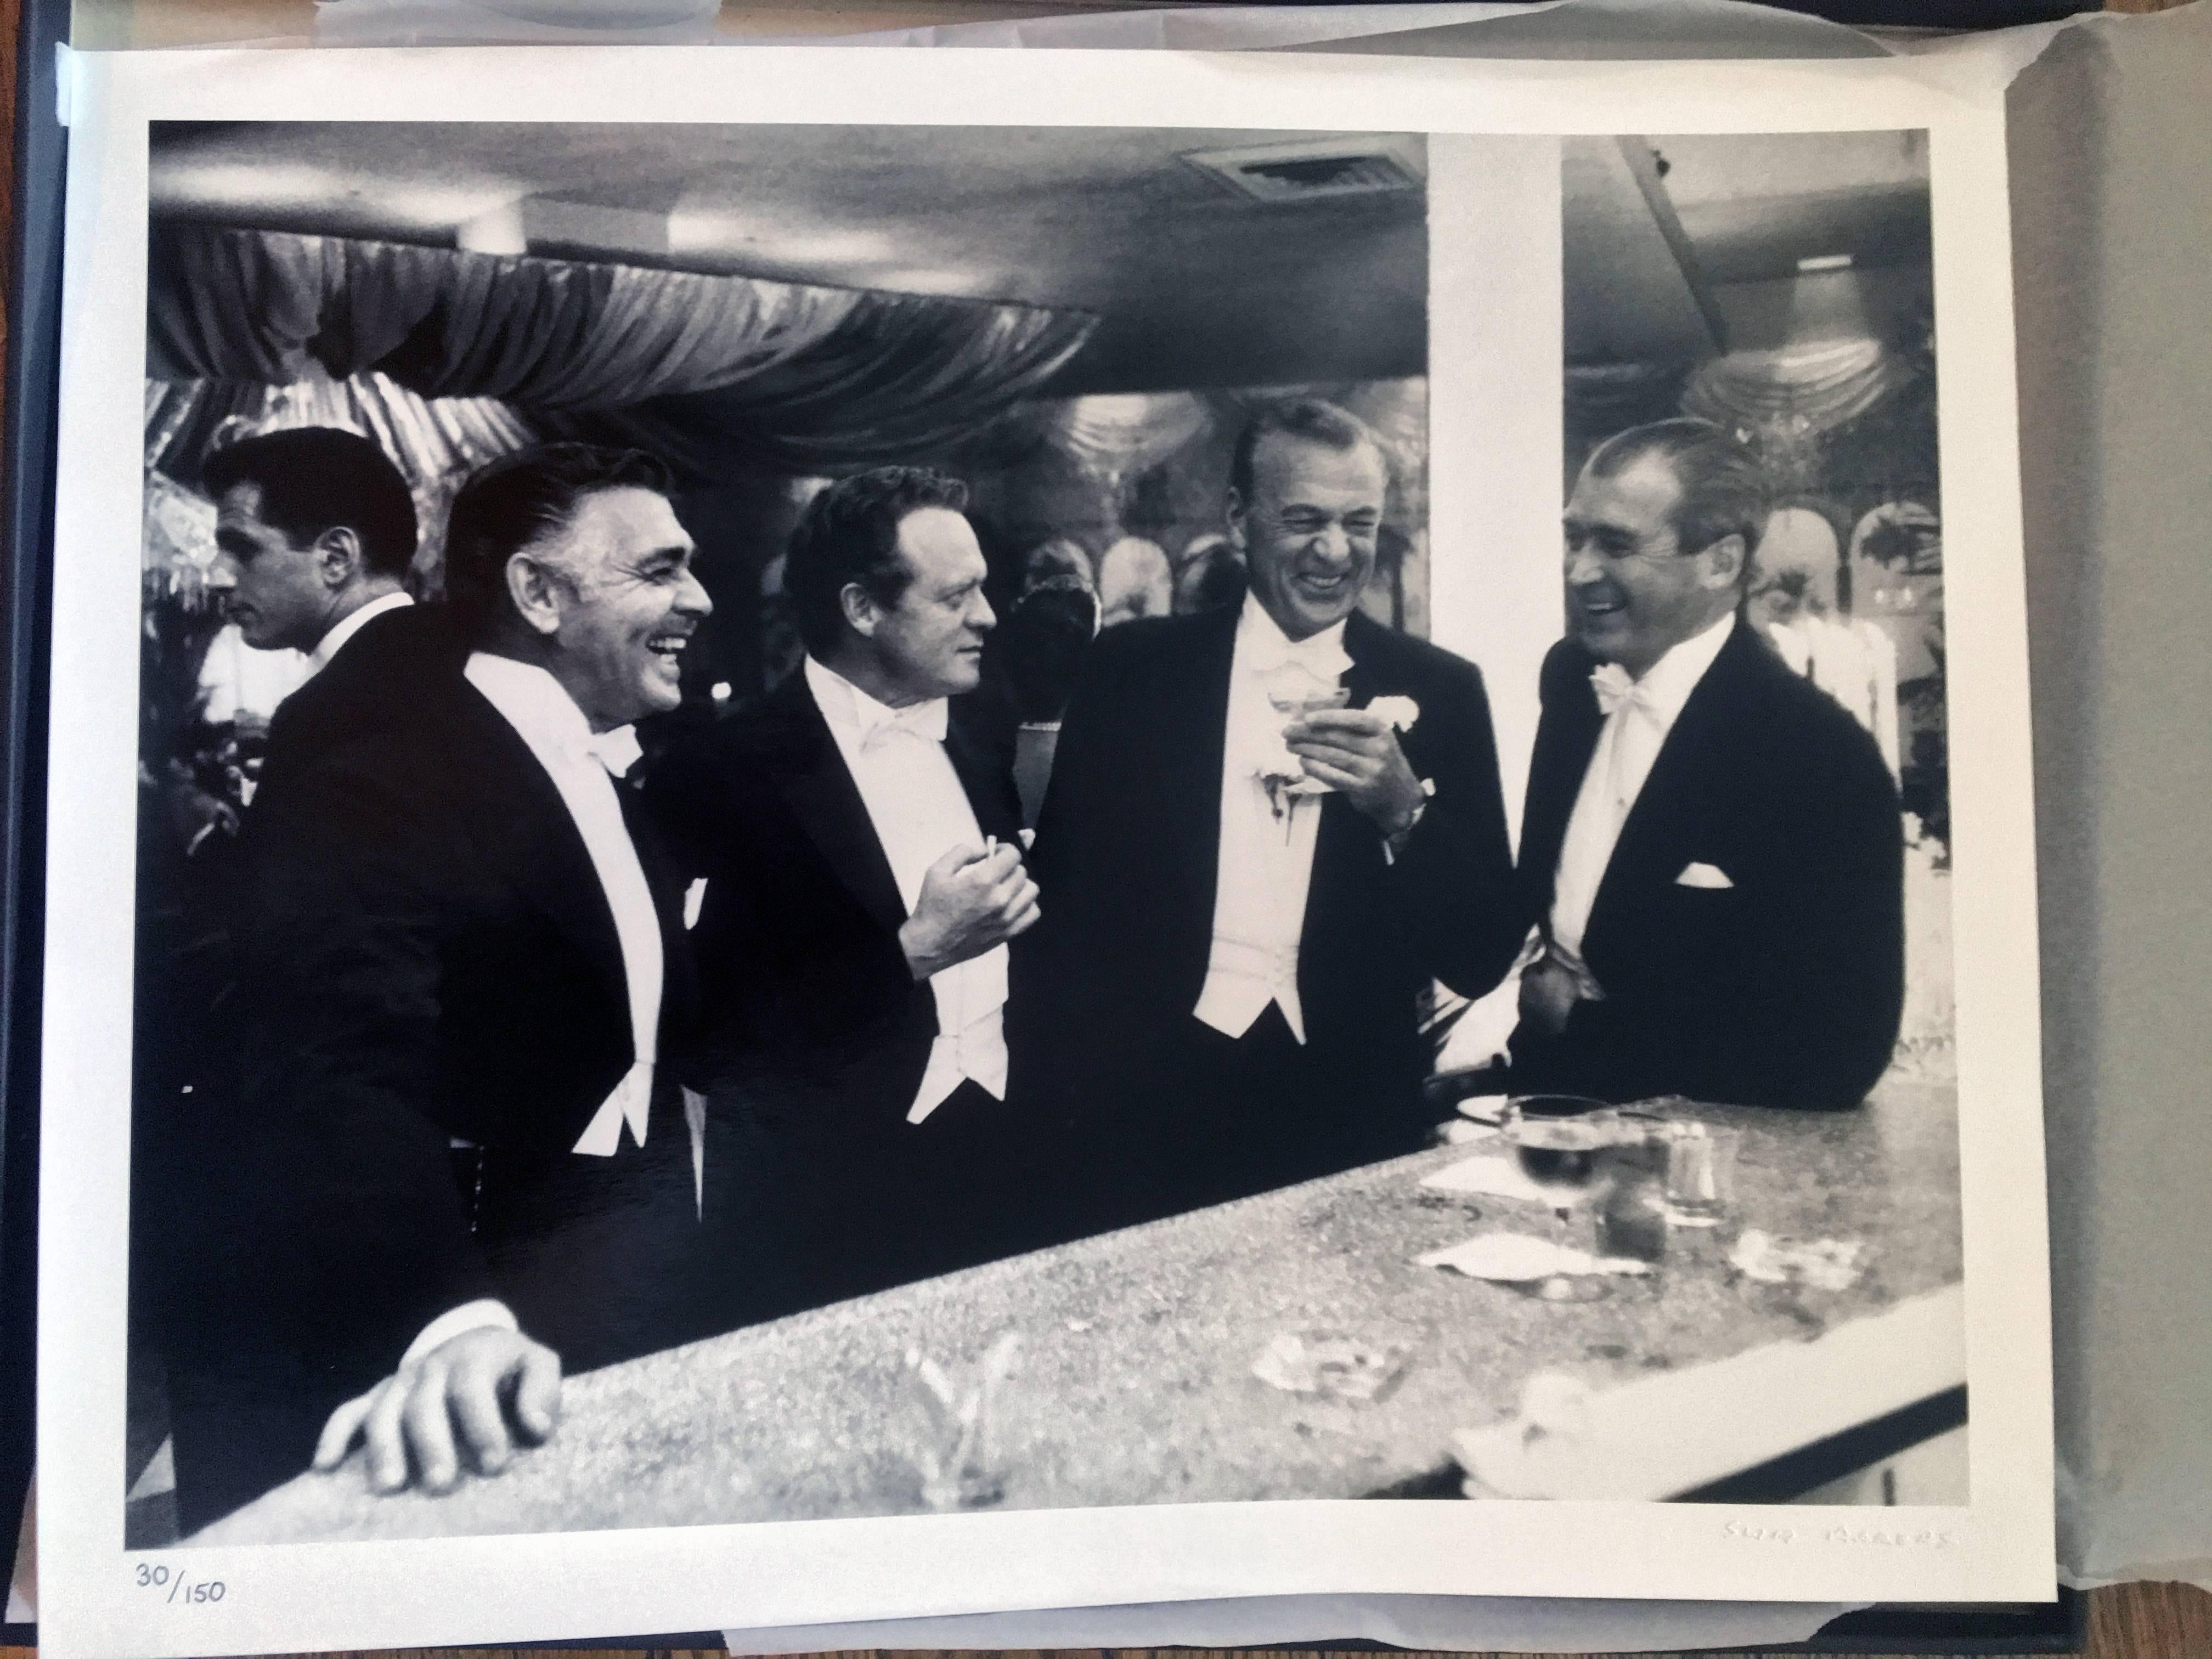 Kings of Hollywood (New Year's at Romanoff's) - Photograph by Slim Aarons